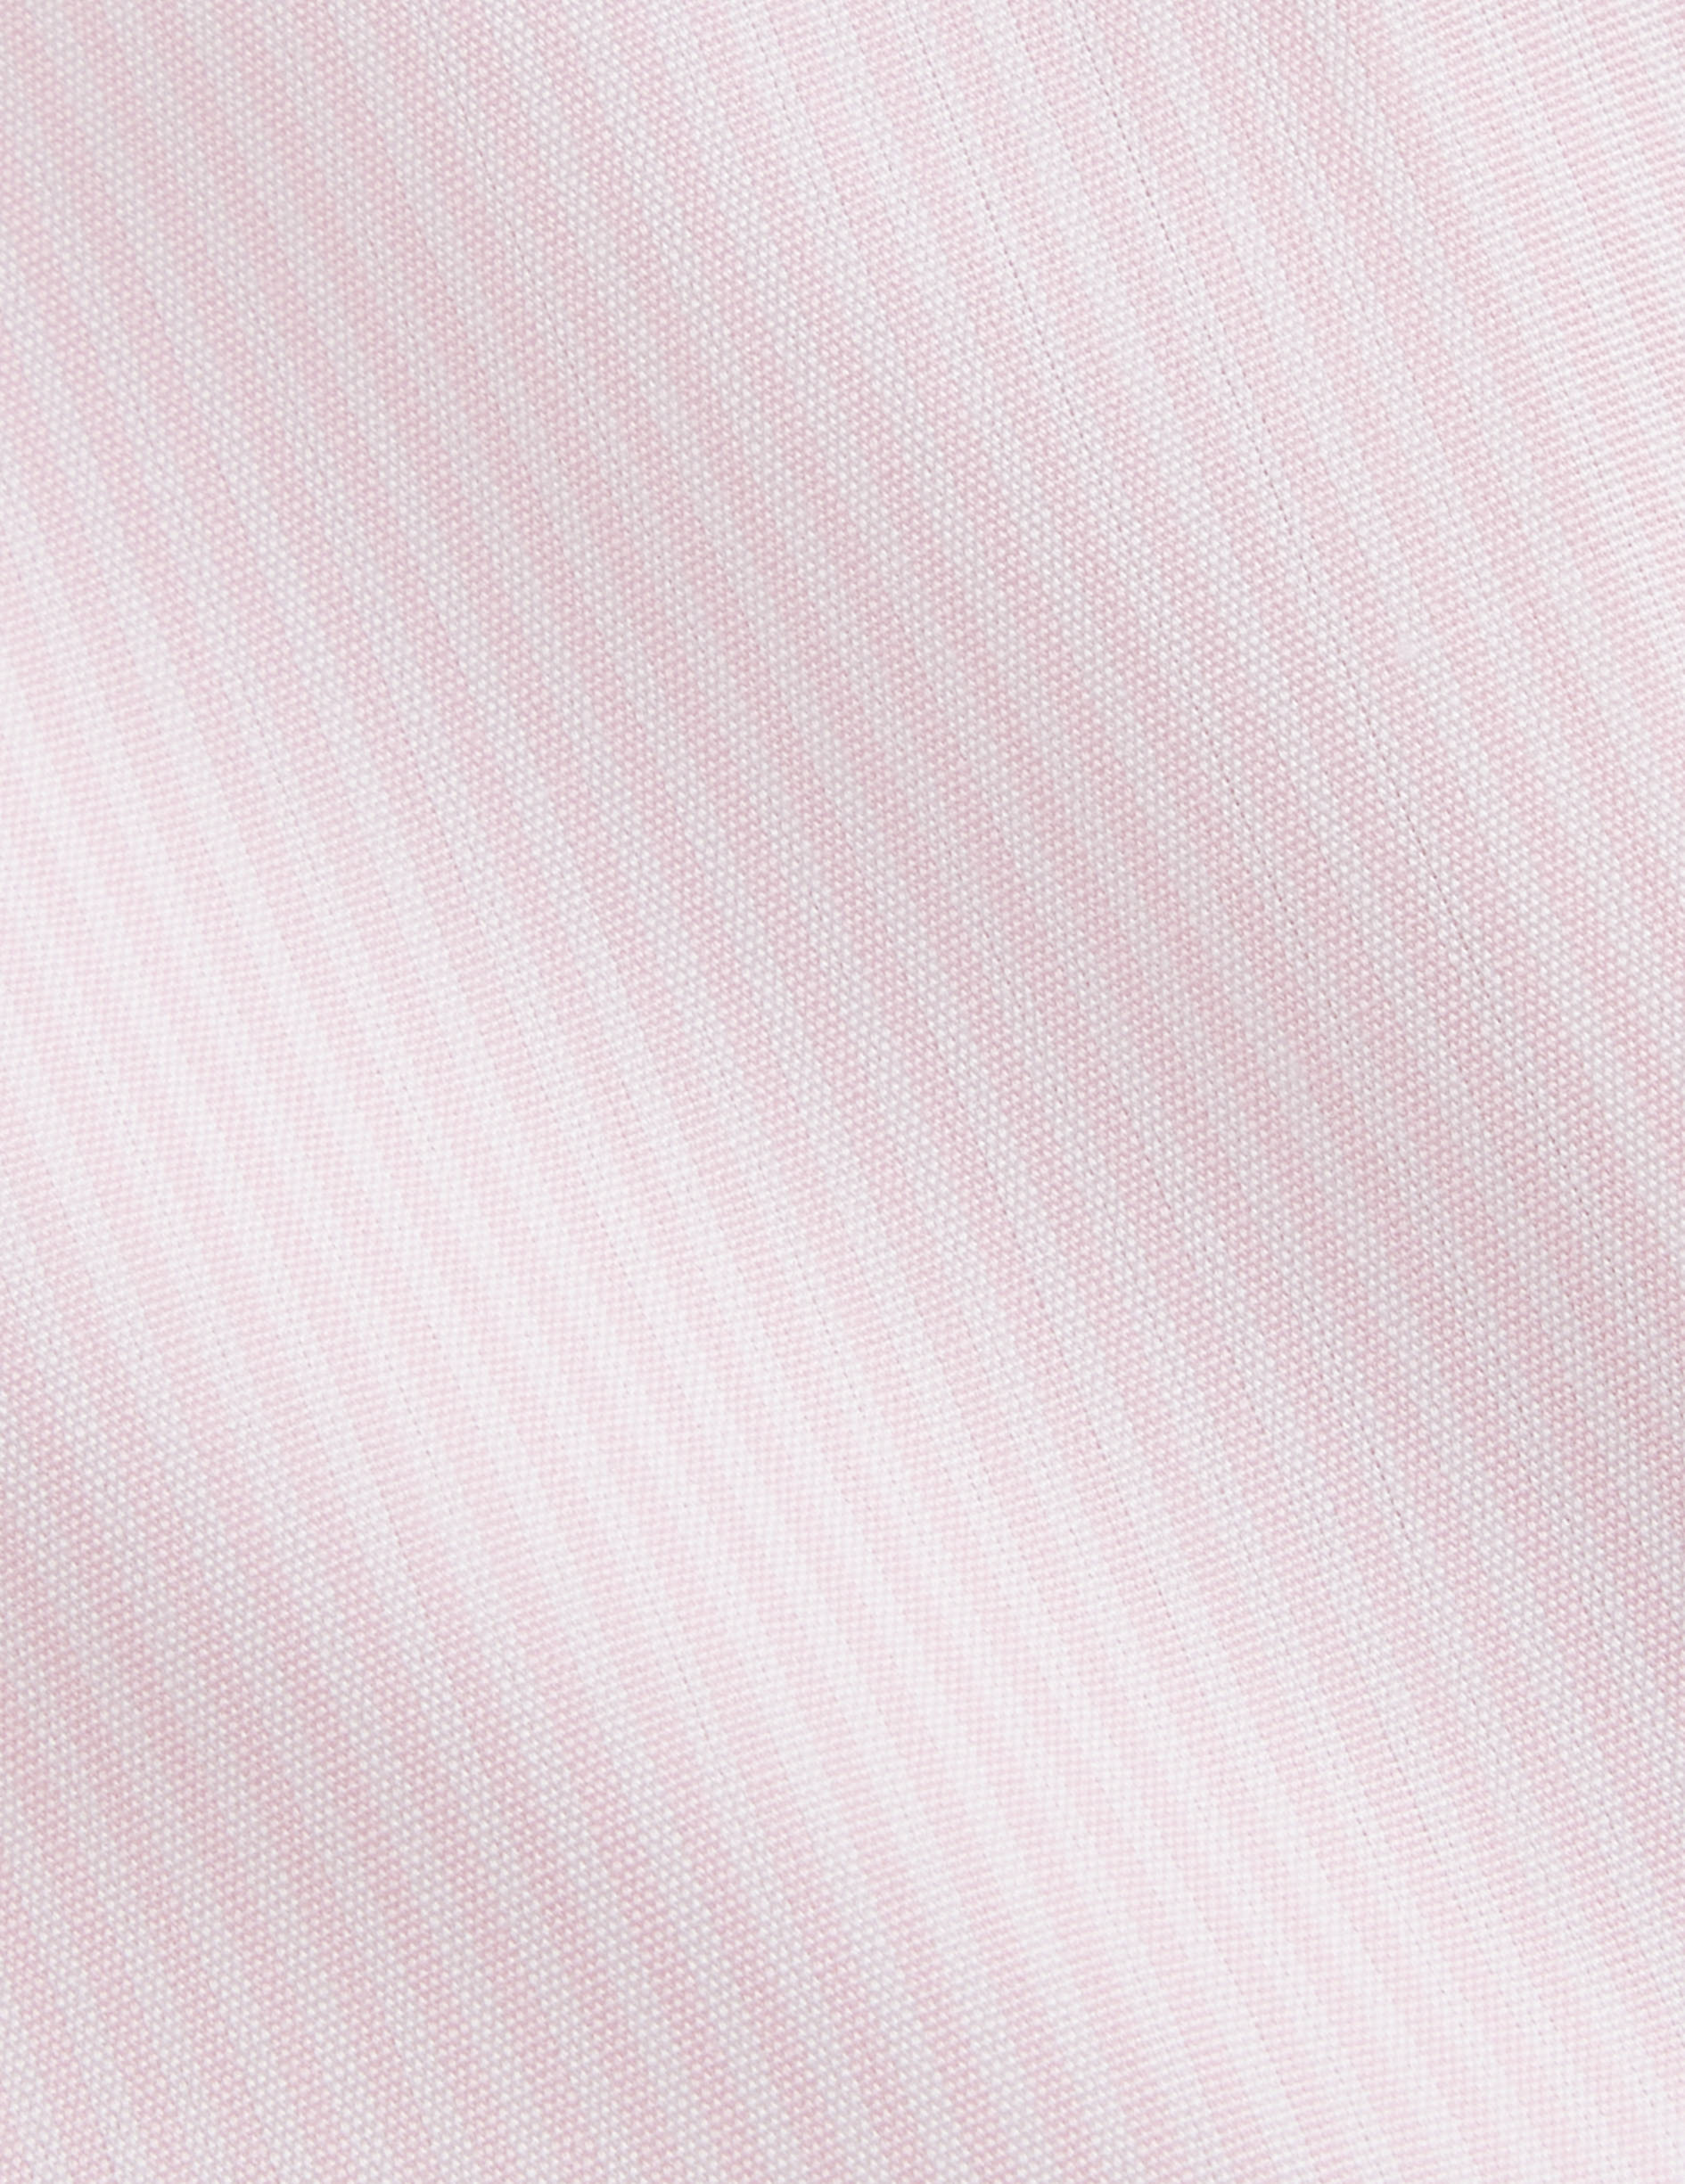 Fitted pink striped shirt - Poplin - Figaret Collar